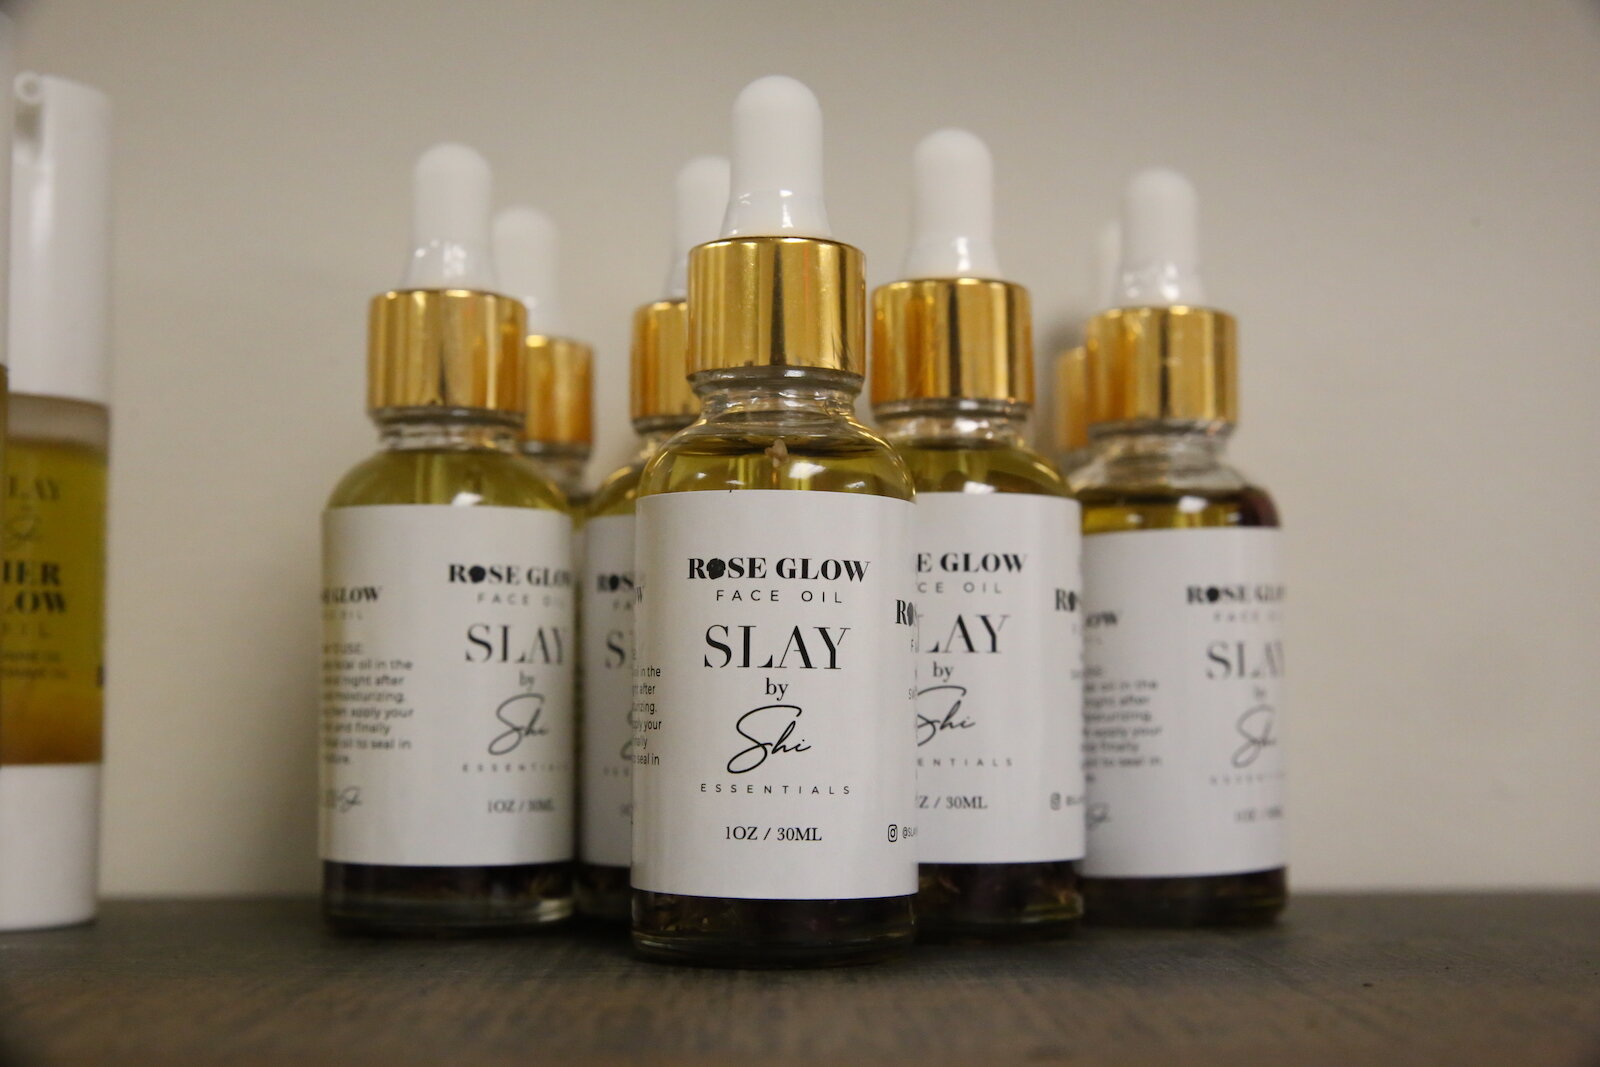 Rose Glow Face Oil by Slay by Shi is one of the top-sellers.